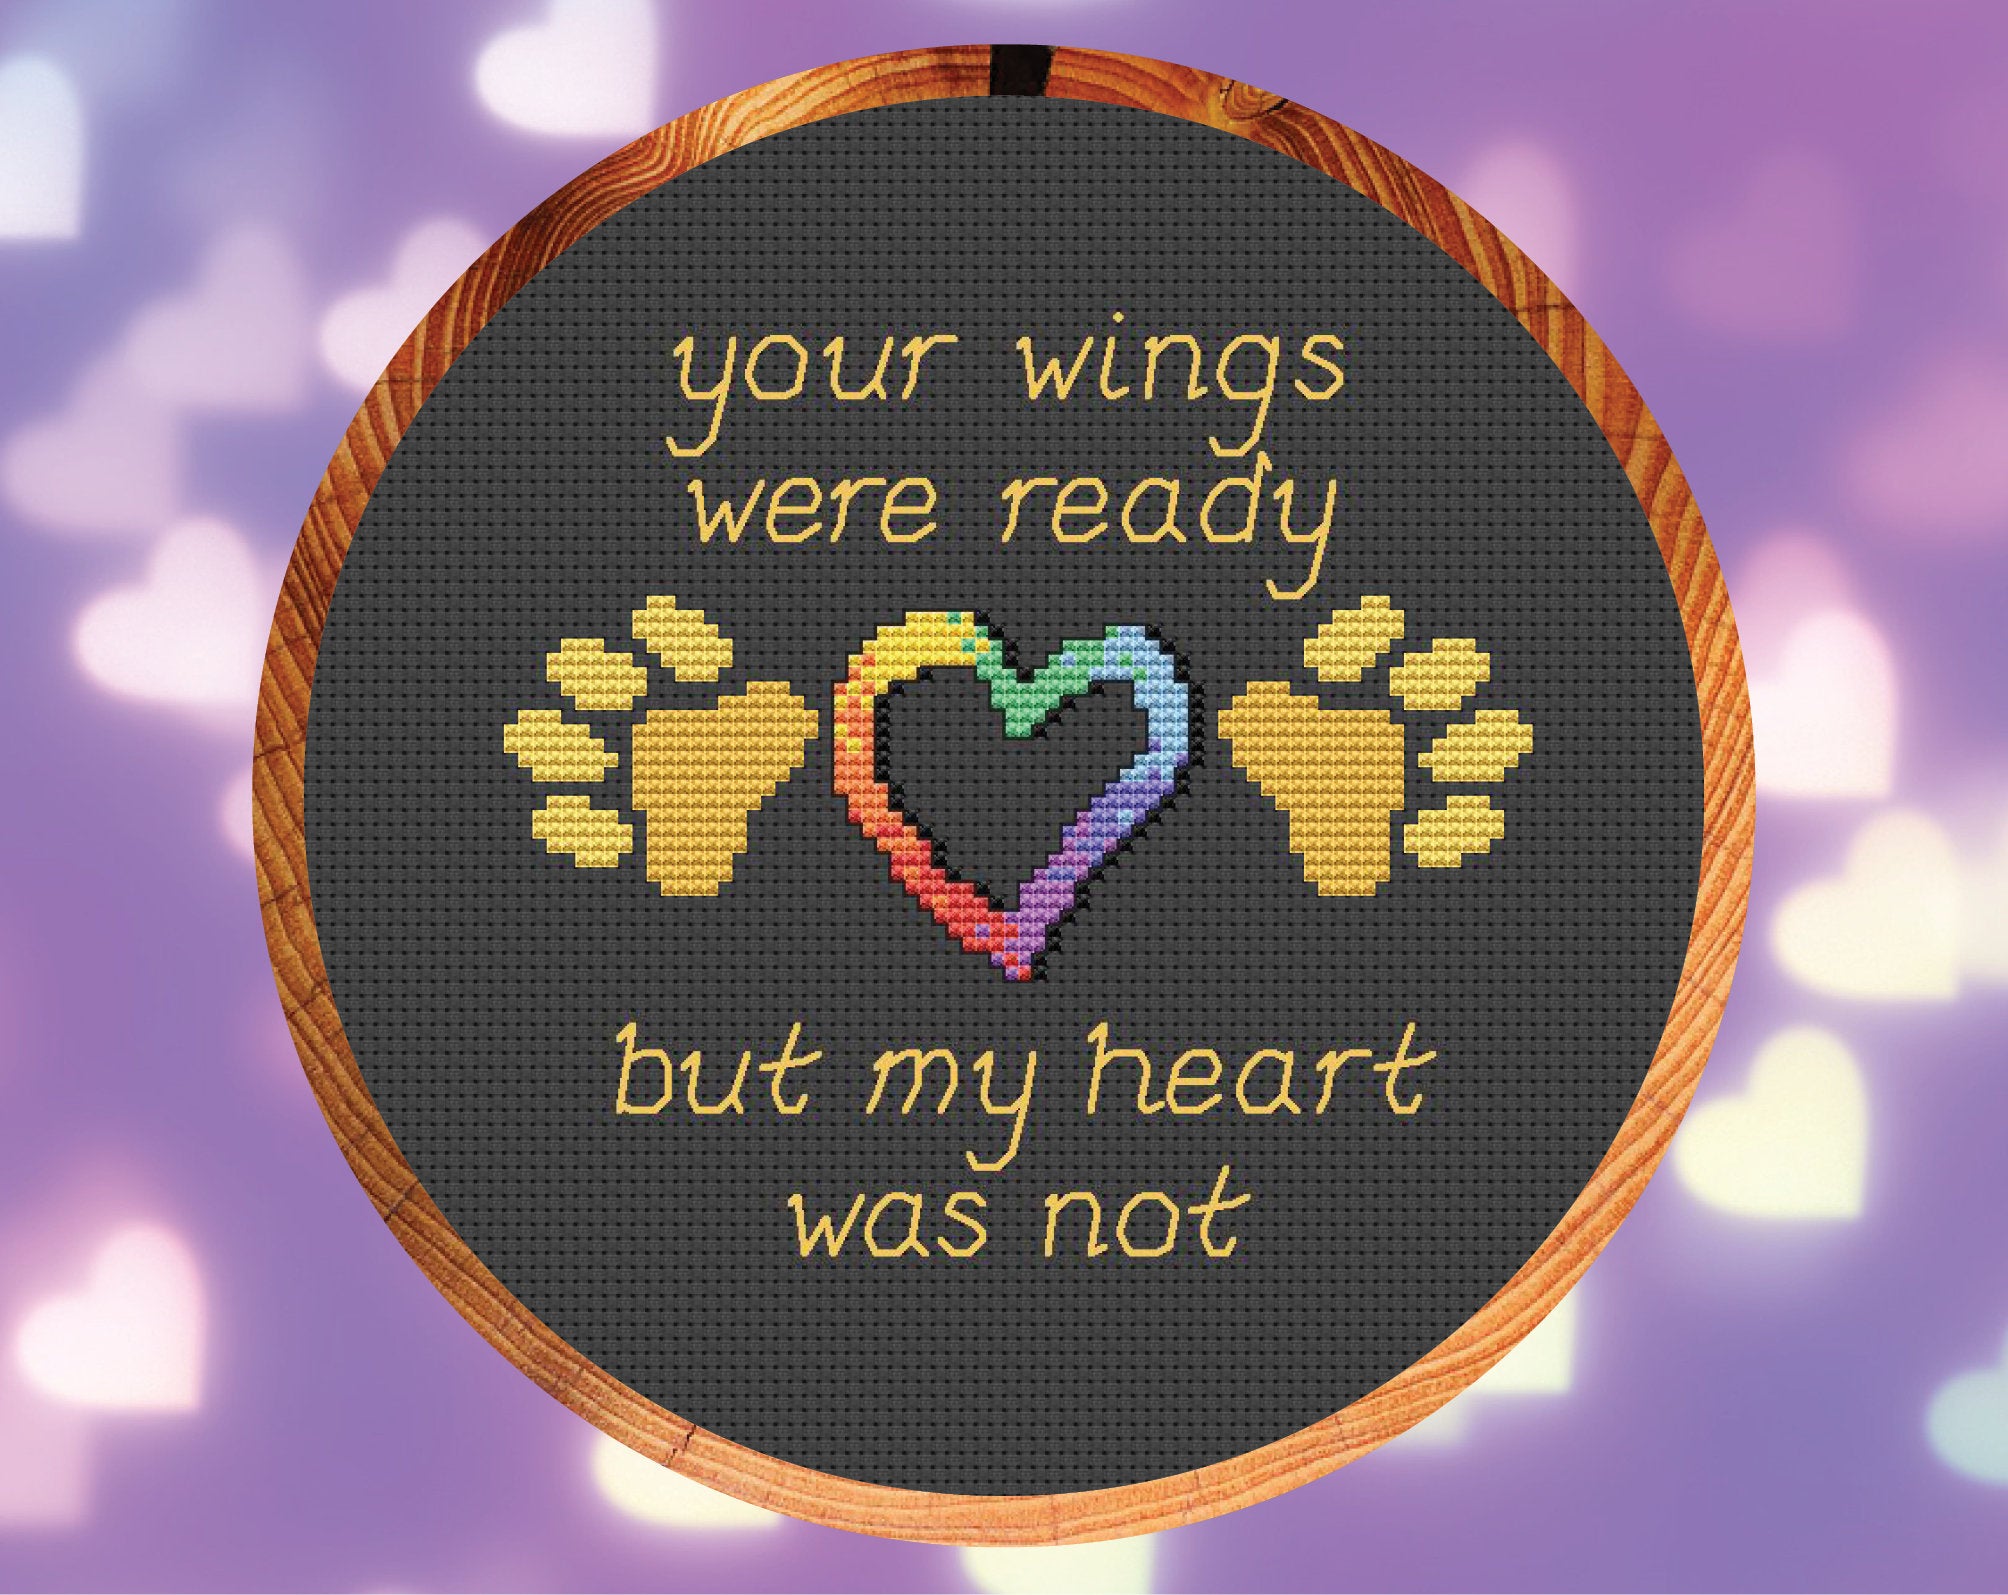 Pet memorial cross stitch pattern of the words 'Your wings were ready, but my heart was not', with paw prints and hearts. Shown in hoop.